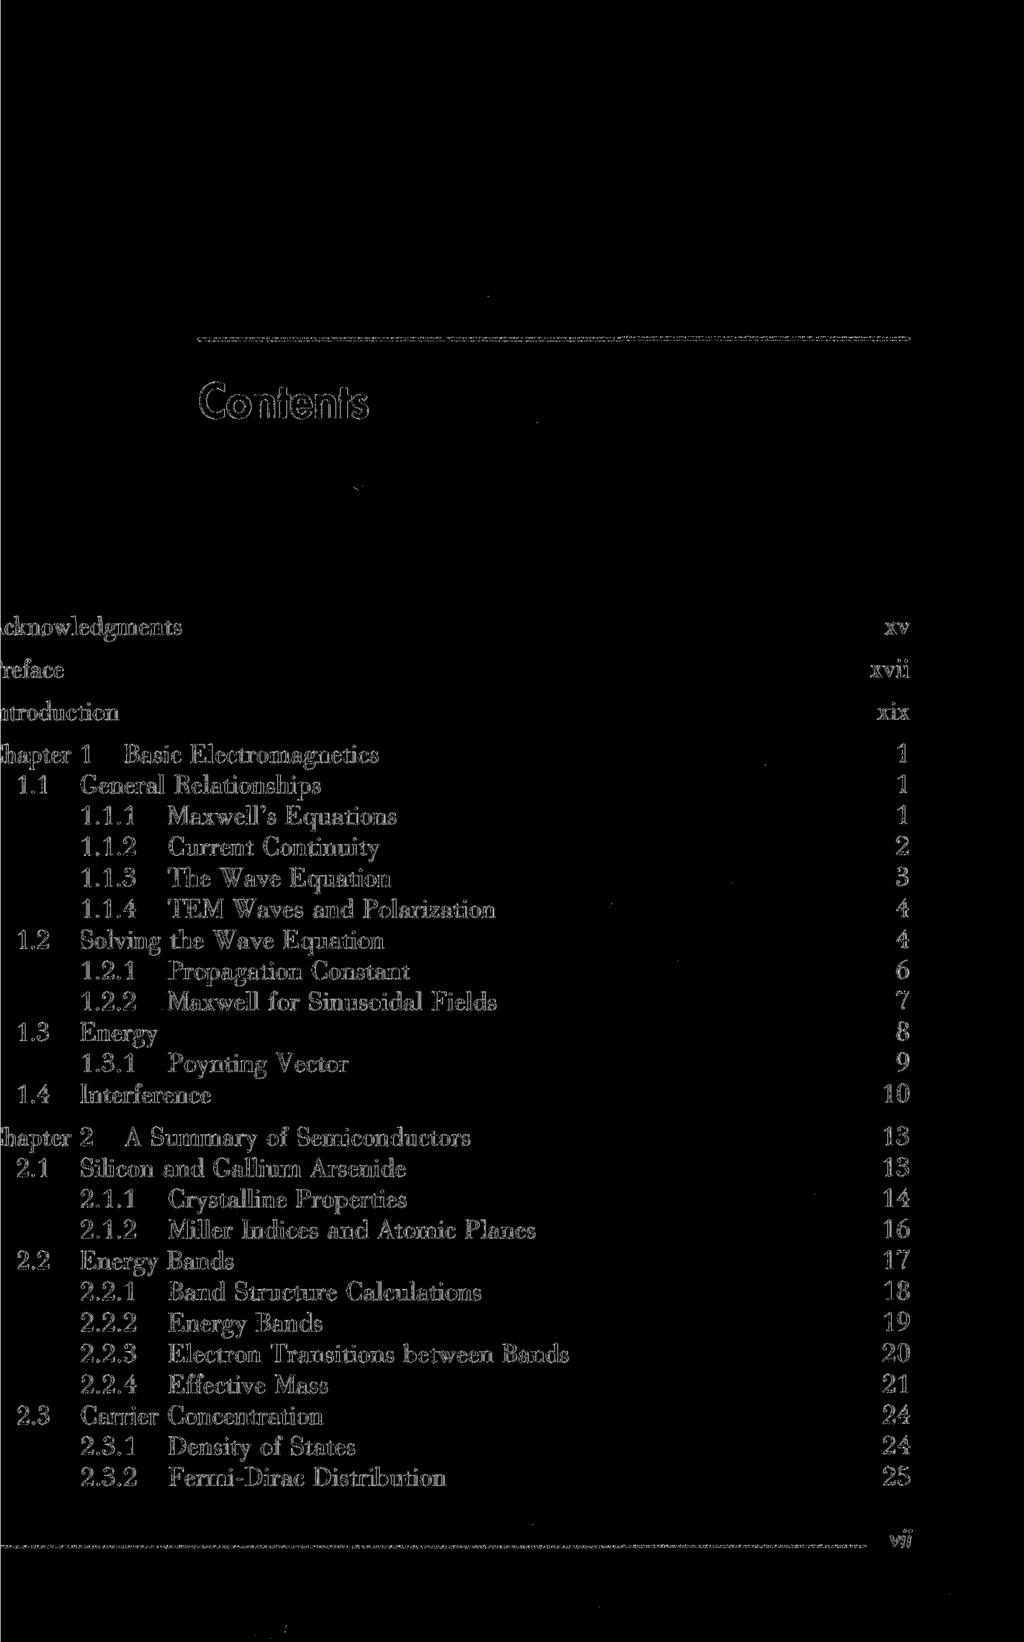 Contents acknowledgments reface itroduction Chapter 1 Basic Electromagnetics 1 1.1 General Relationships 1 1.1.1 Maxwell's Equations 1 1.1.2 Current Continuity 2 1.1.3 The Wave Equation 3 1.1.4 ТЕМ Waves and Polarization 4 1.